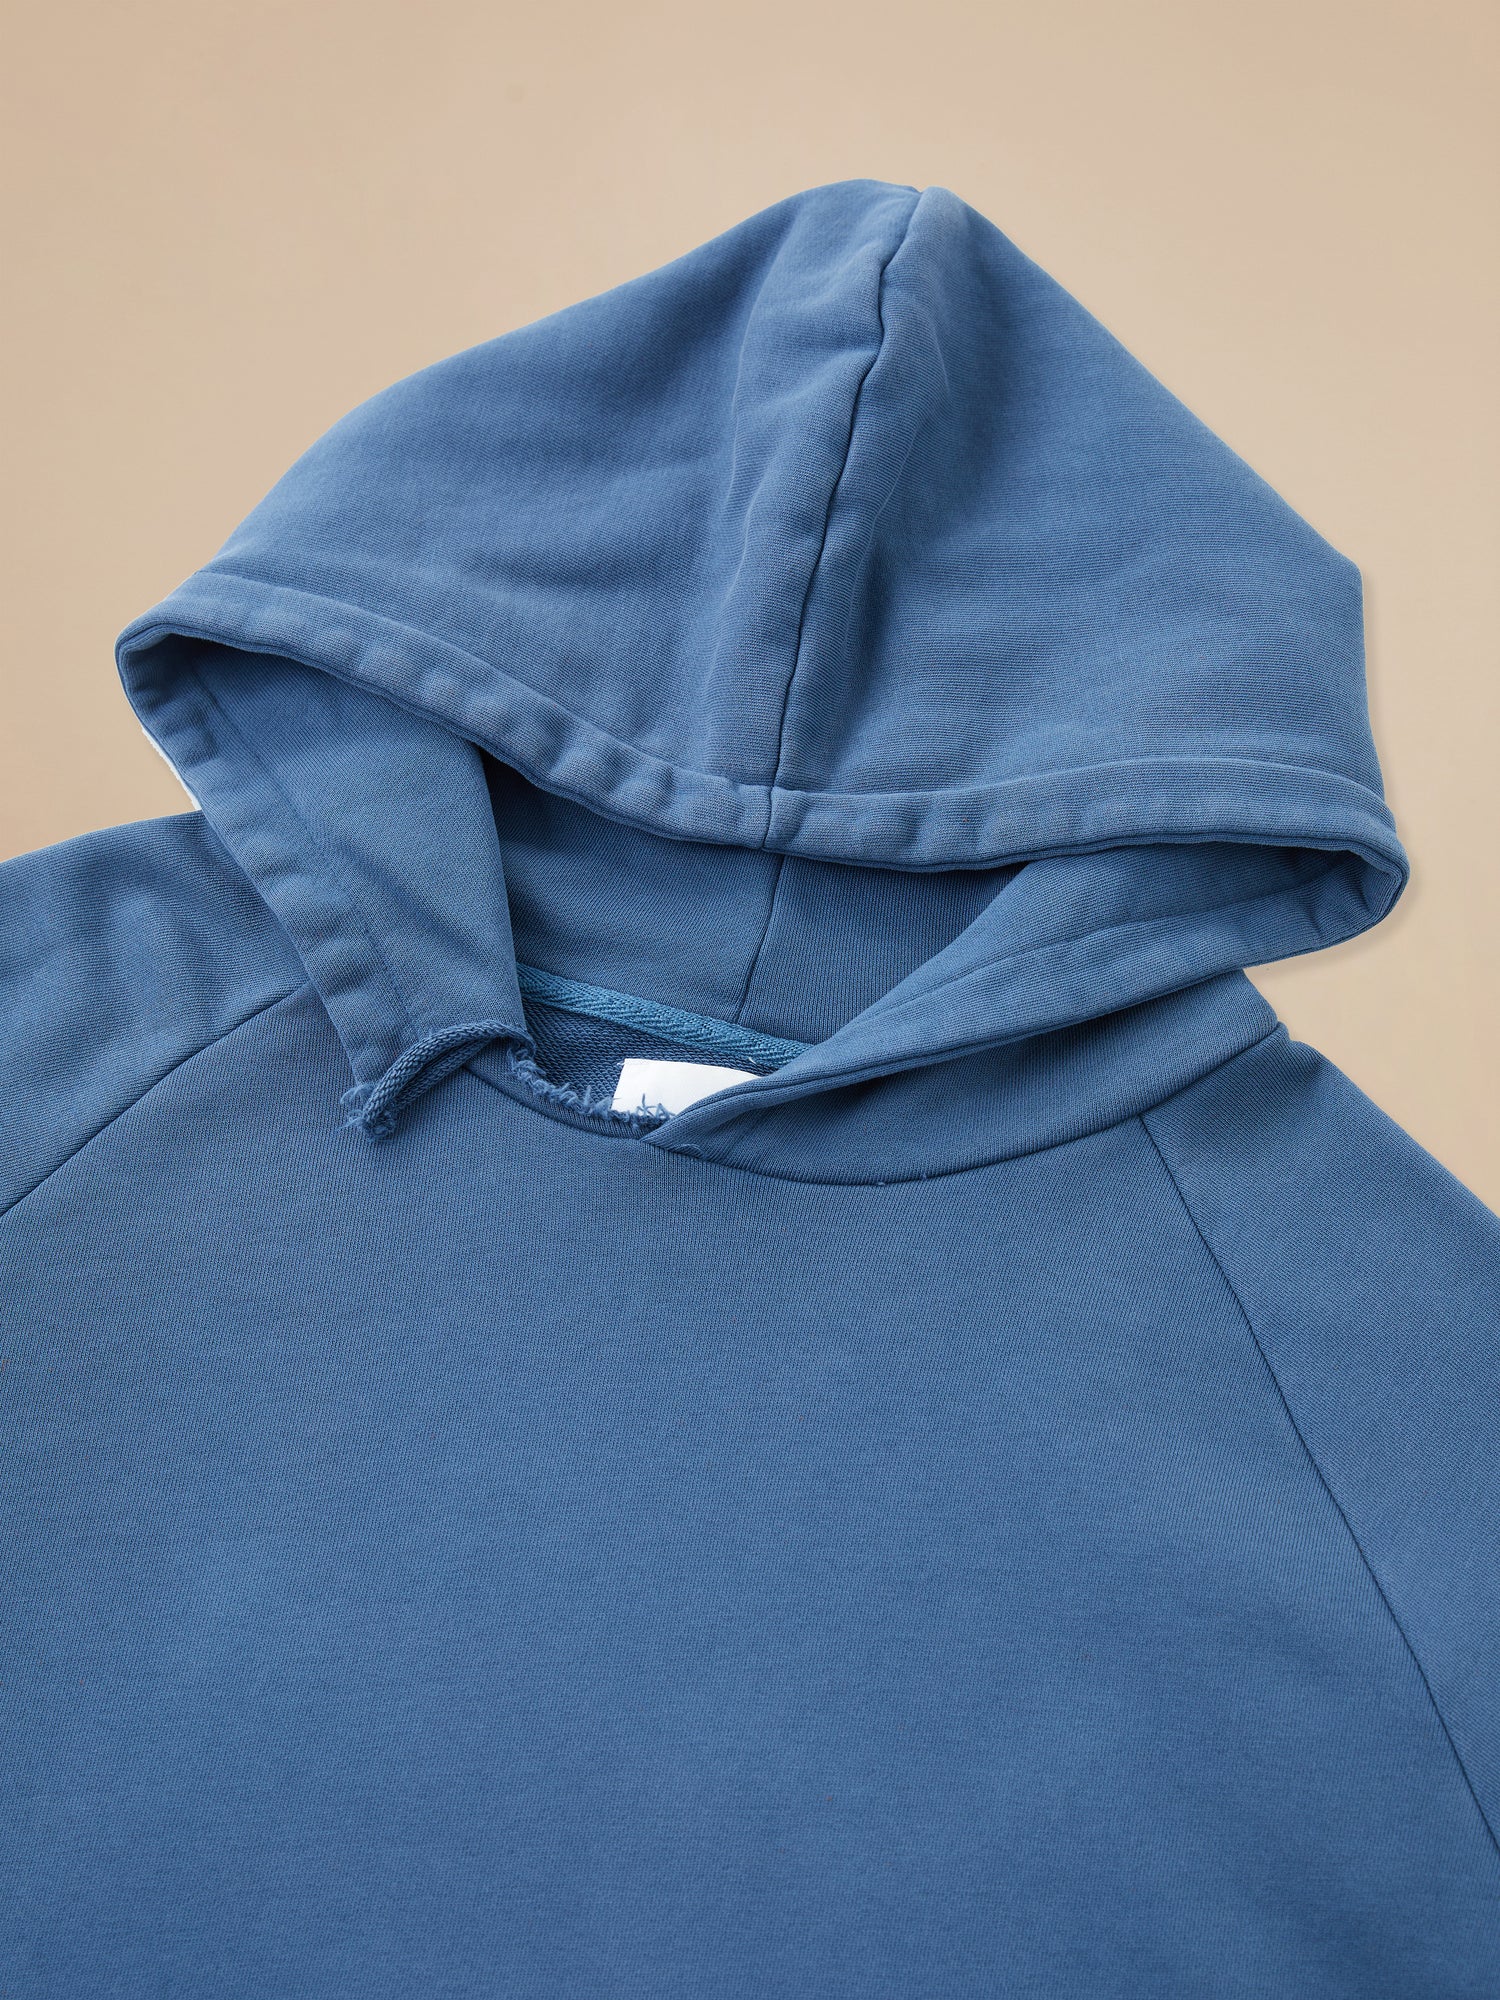 A close up of a Found Timber Campground Hoodie.